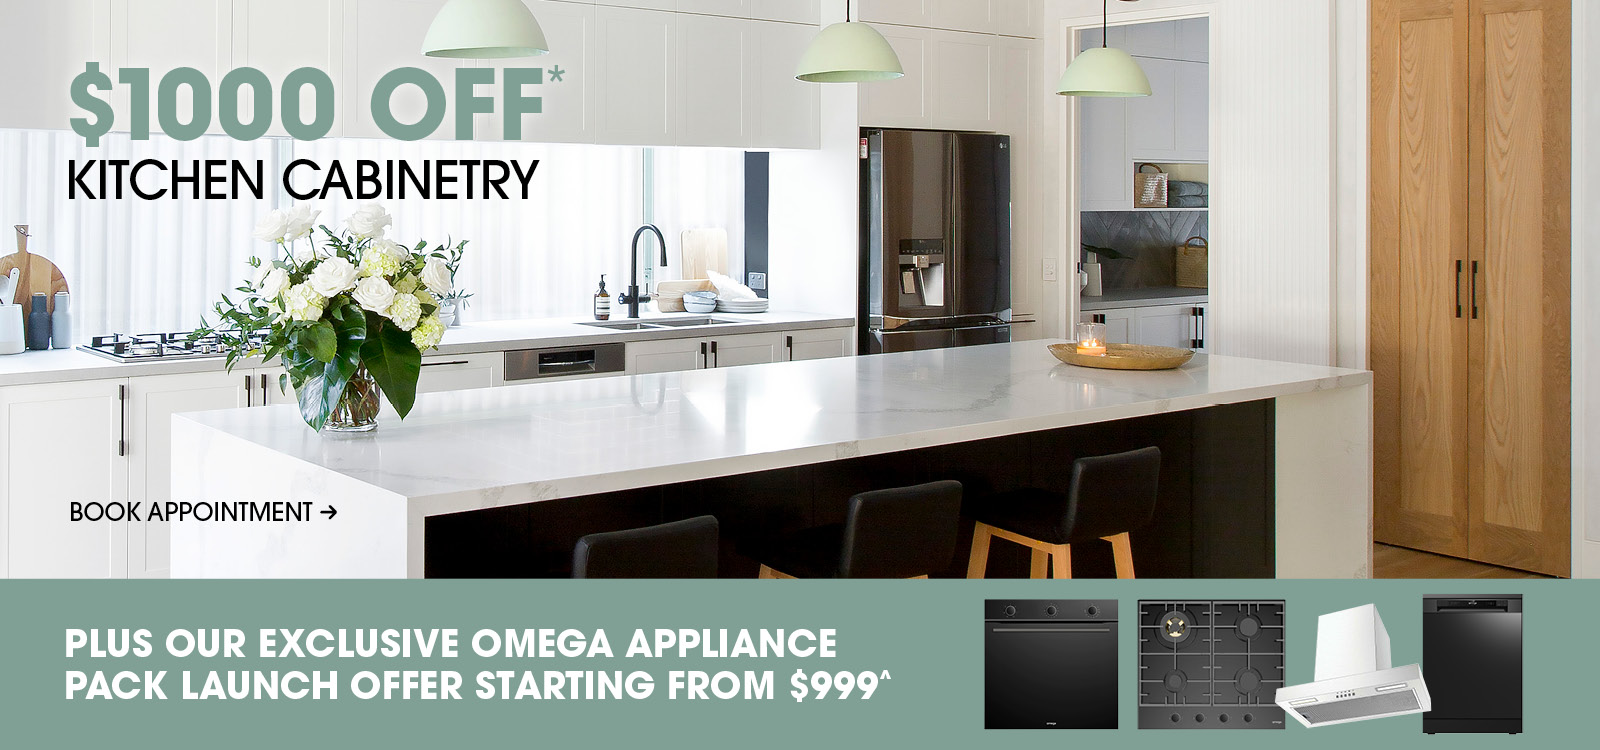 Freedom Kitchens - $1000 Off Cabinetry + Omega Appliance Pack